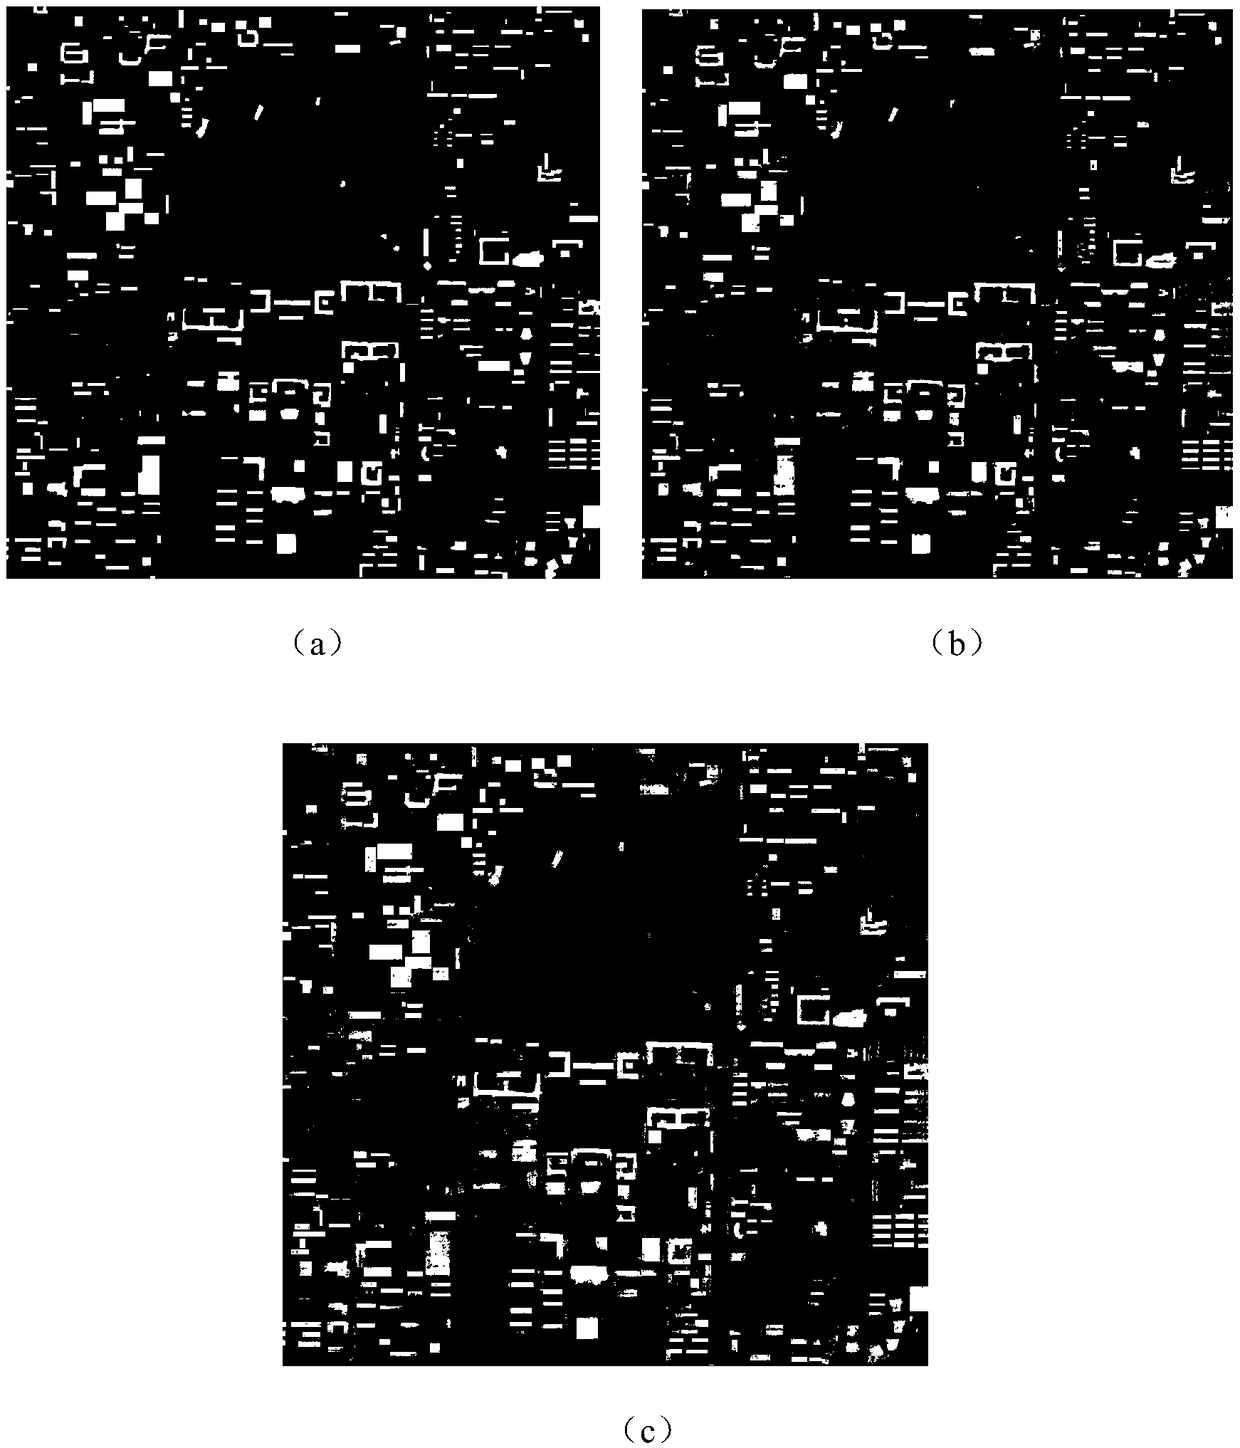 Multispectral image classification method based on adaptive feature fusion residual network